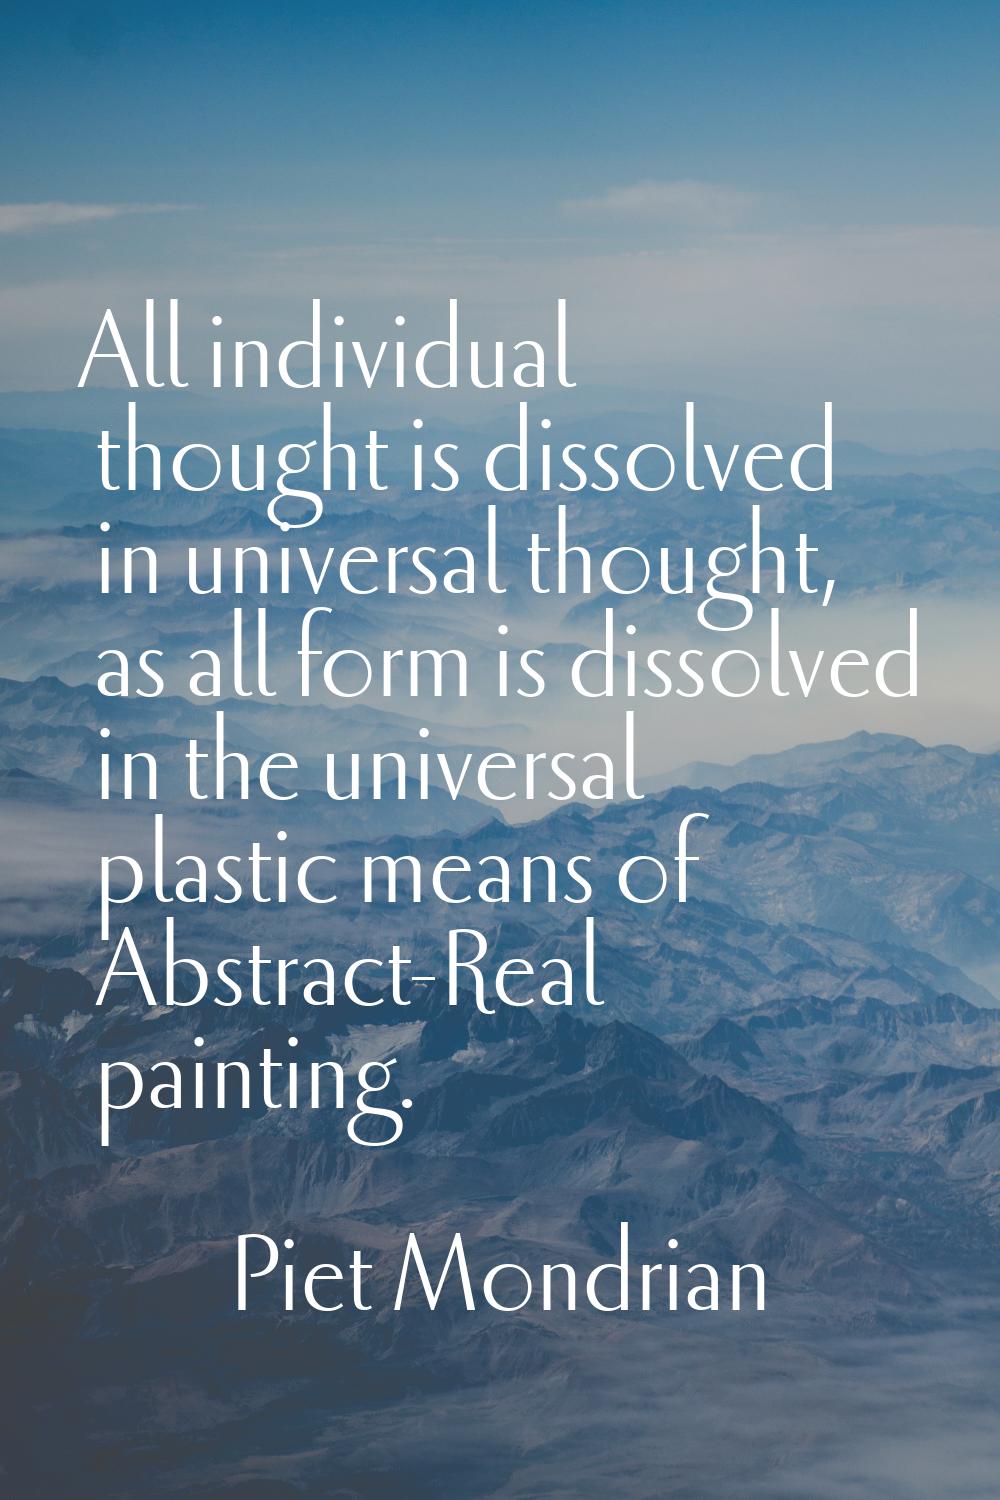 All individual thought is dissolved in universal thought, as all form is dissolved in the universal